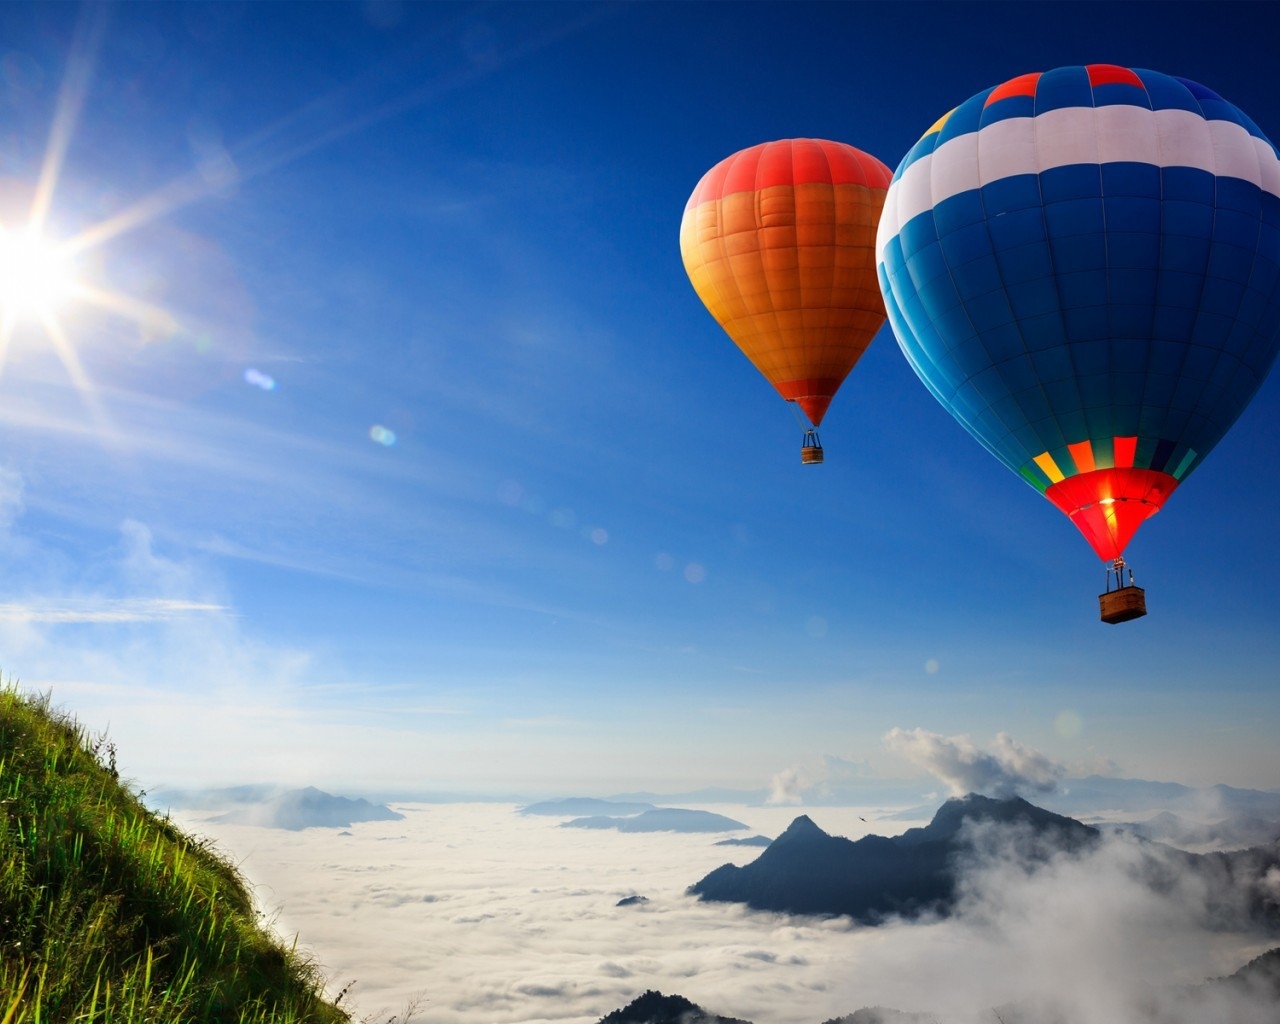 Hot Air Balloons for 1280 x 1024 resolution